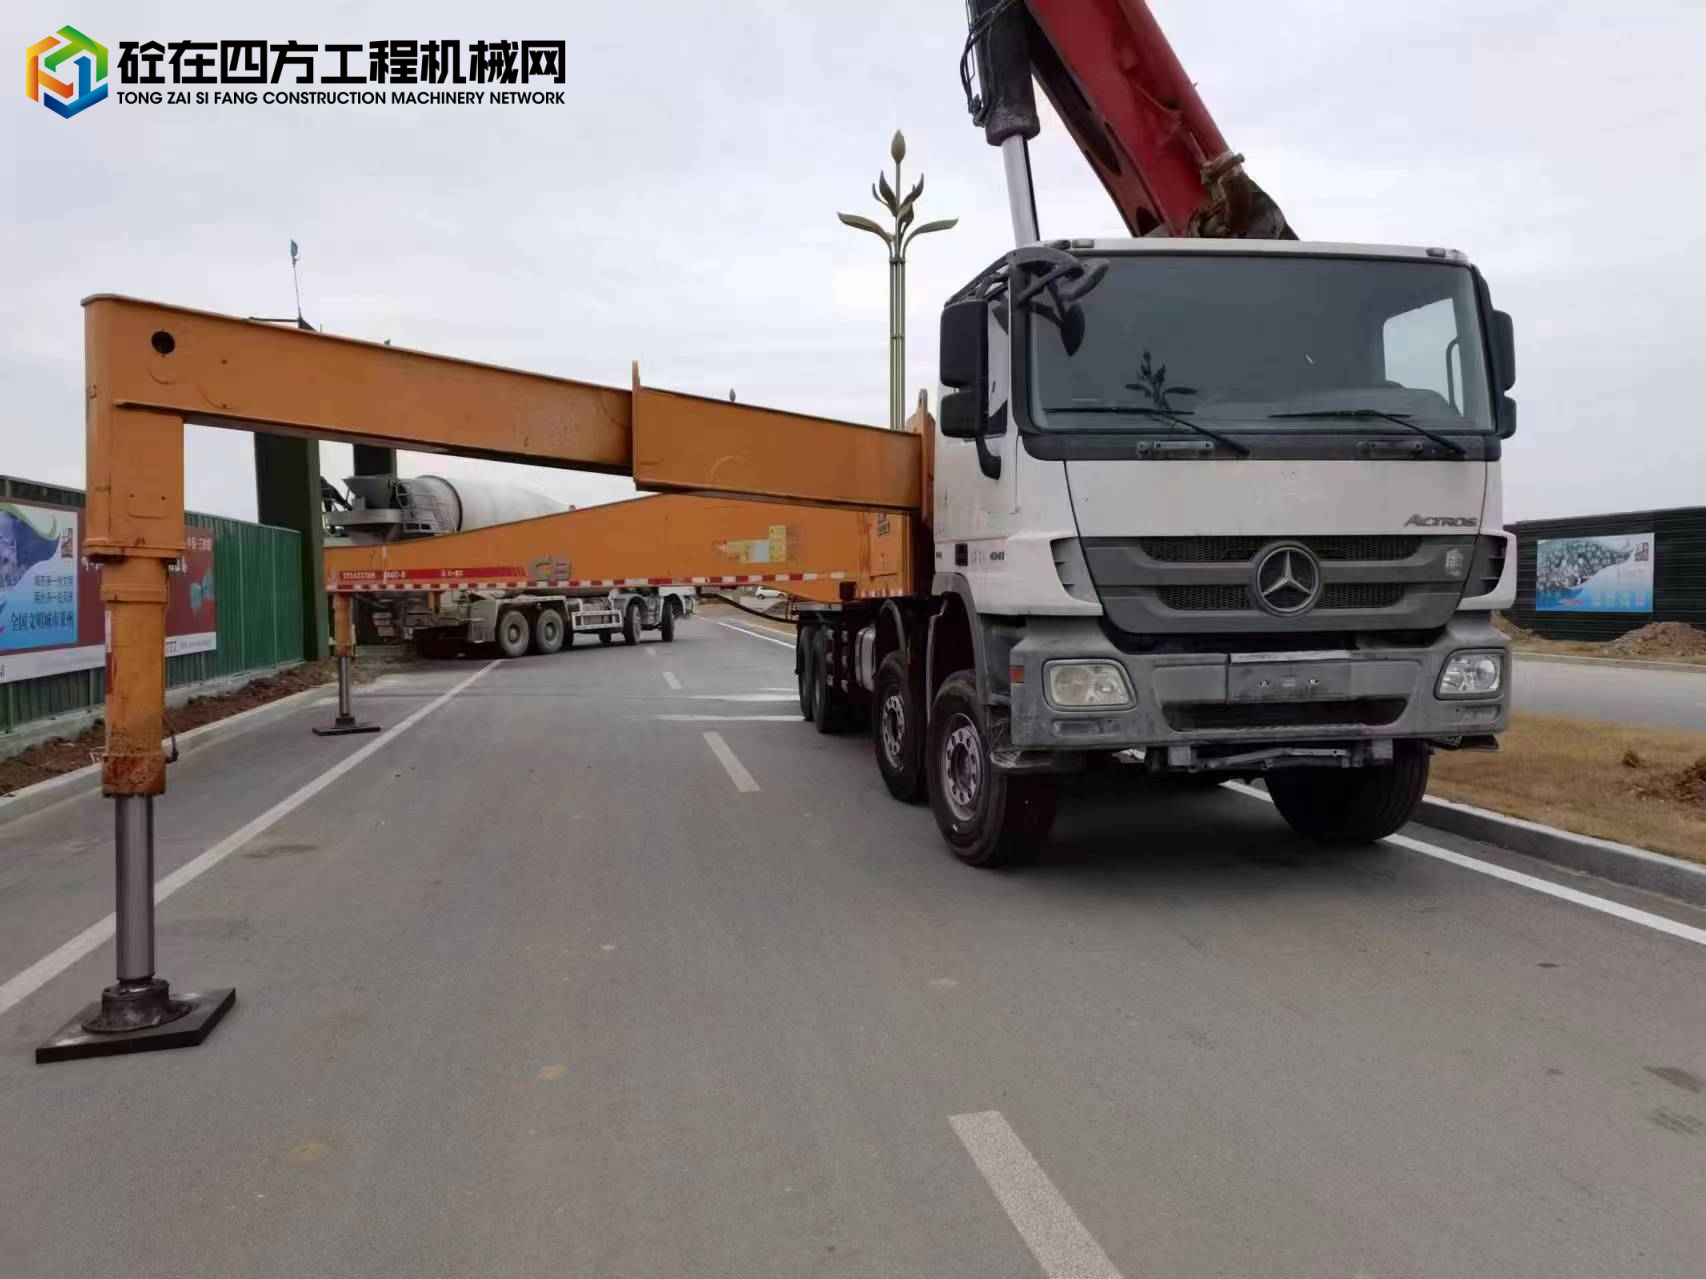 https://images.tongzsf.com/tong/truck_machine/20240313/165f14520af8e1.jpg